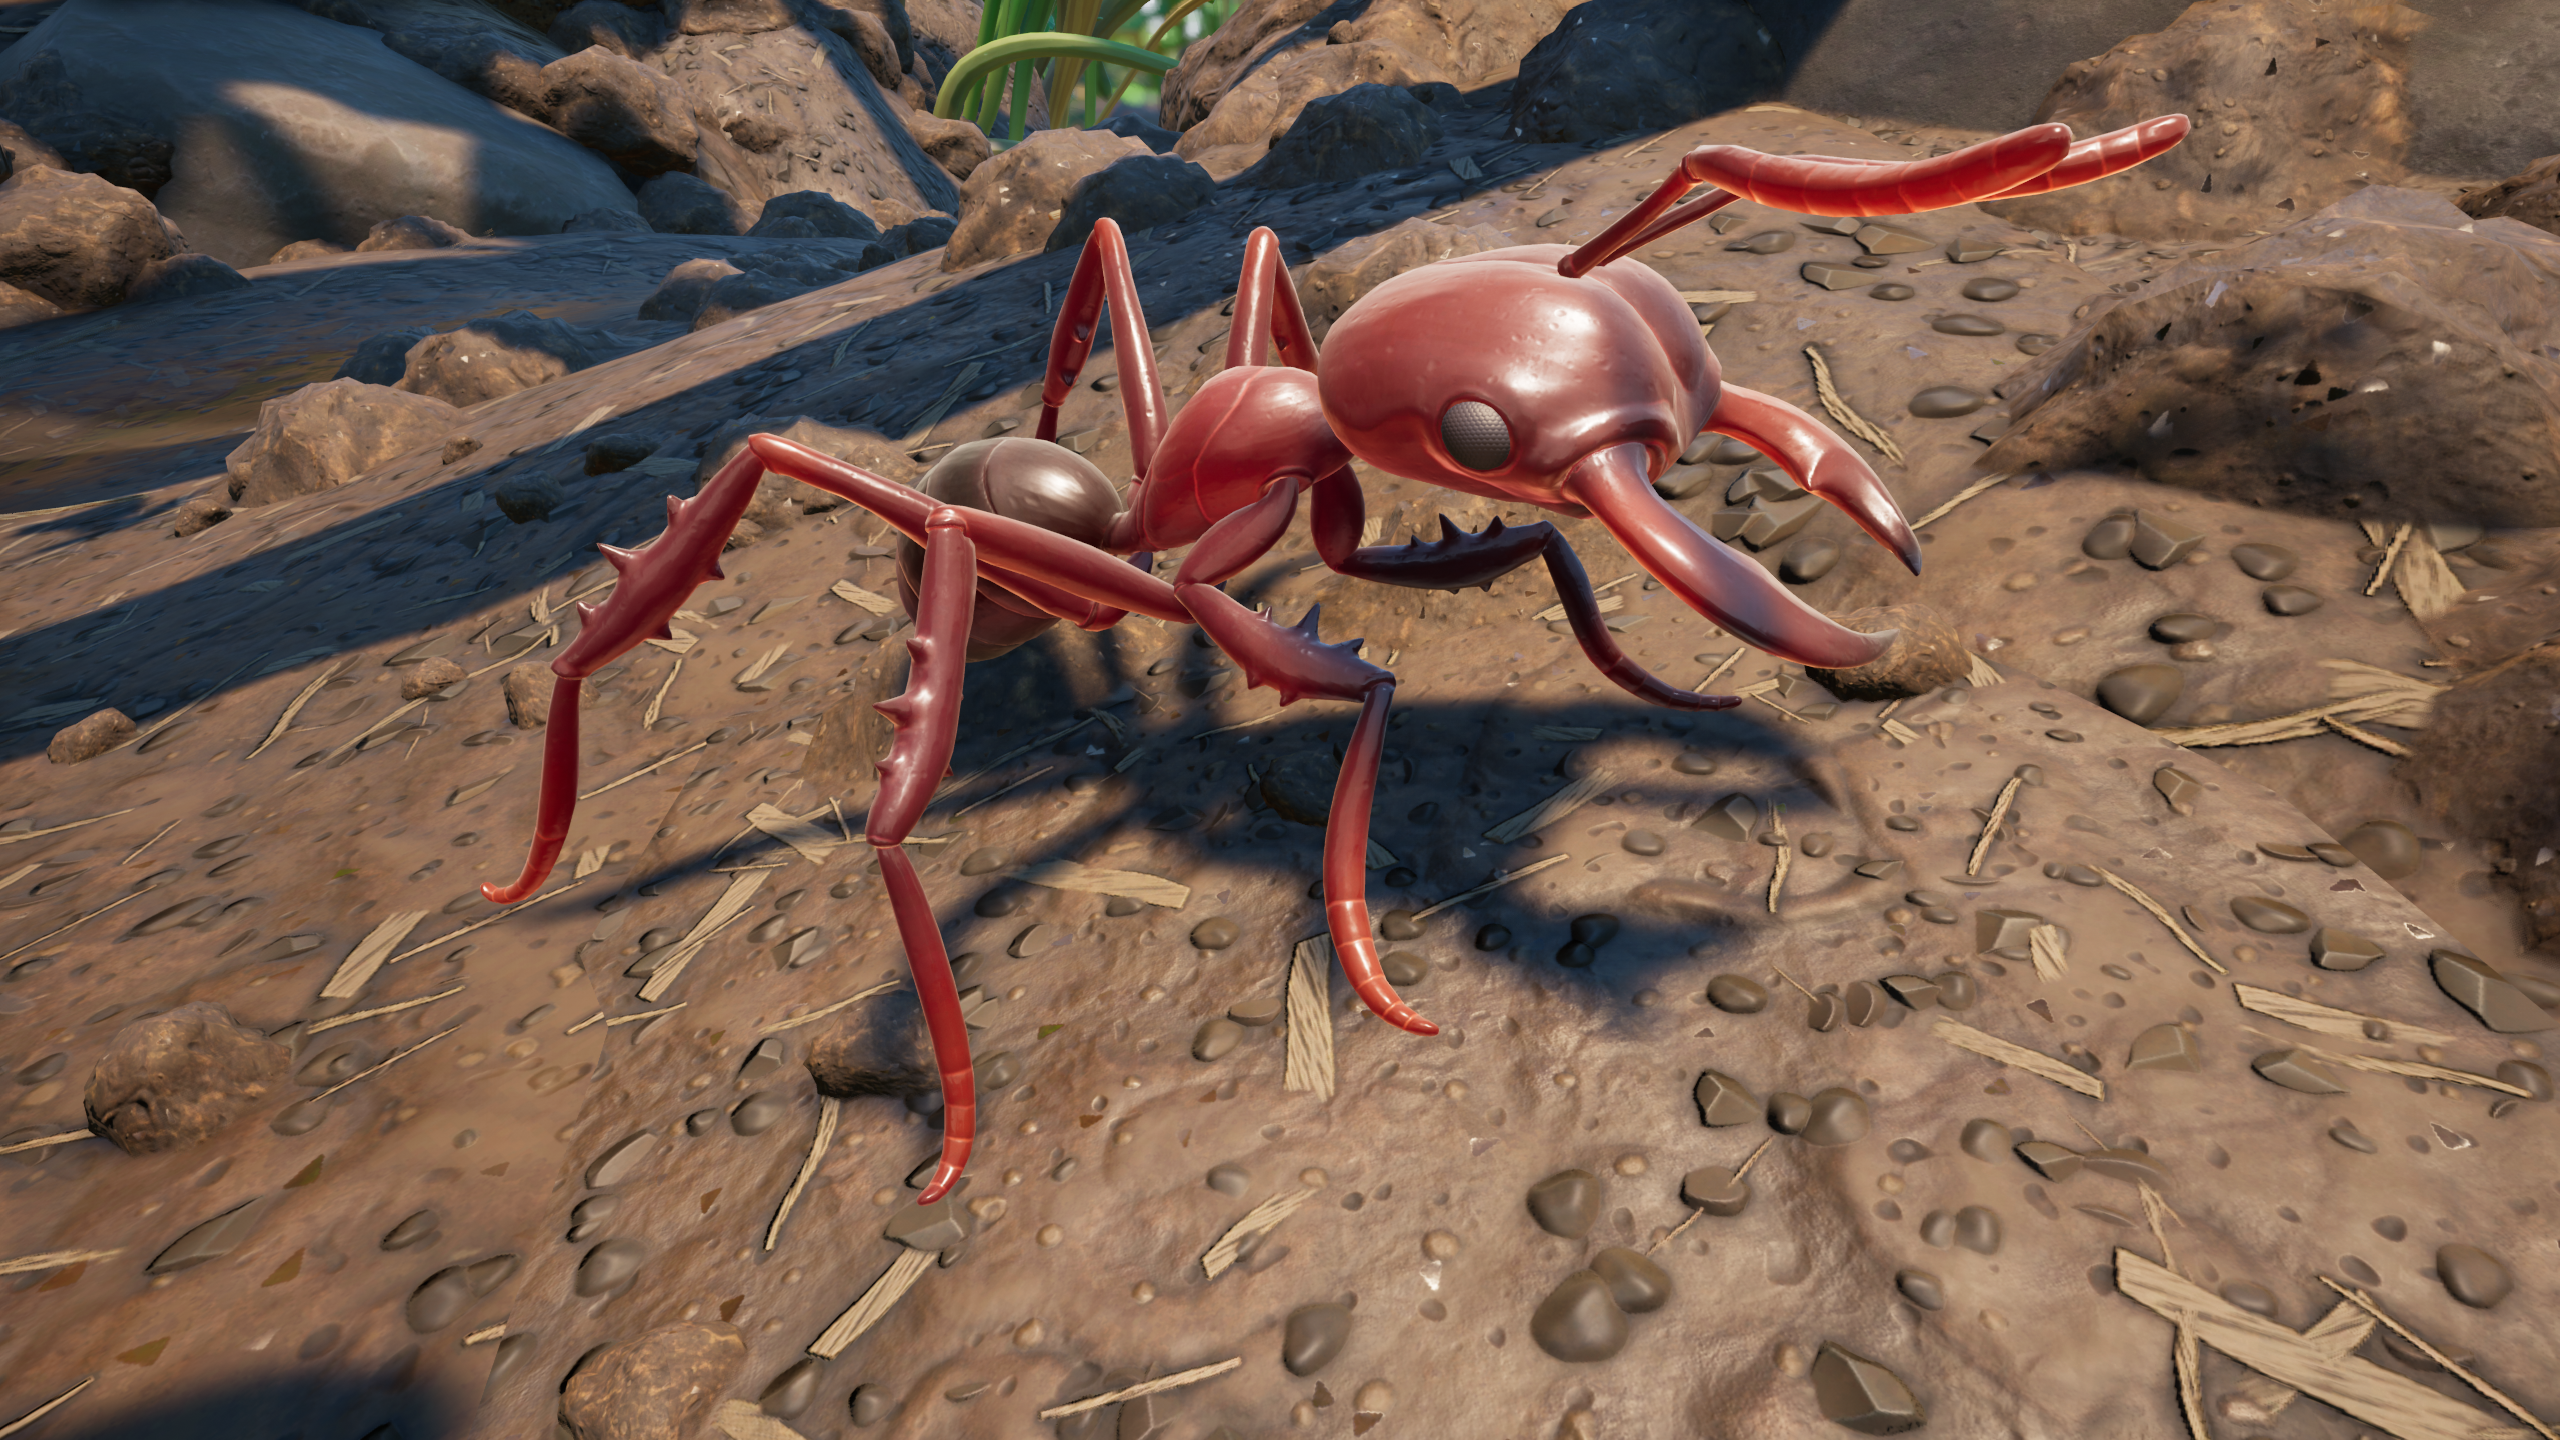 king fire ant